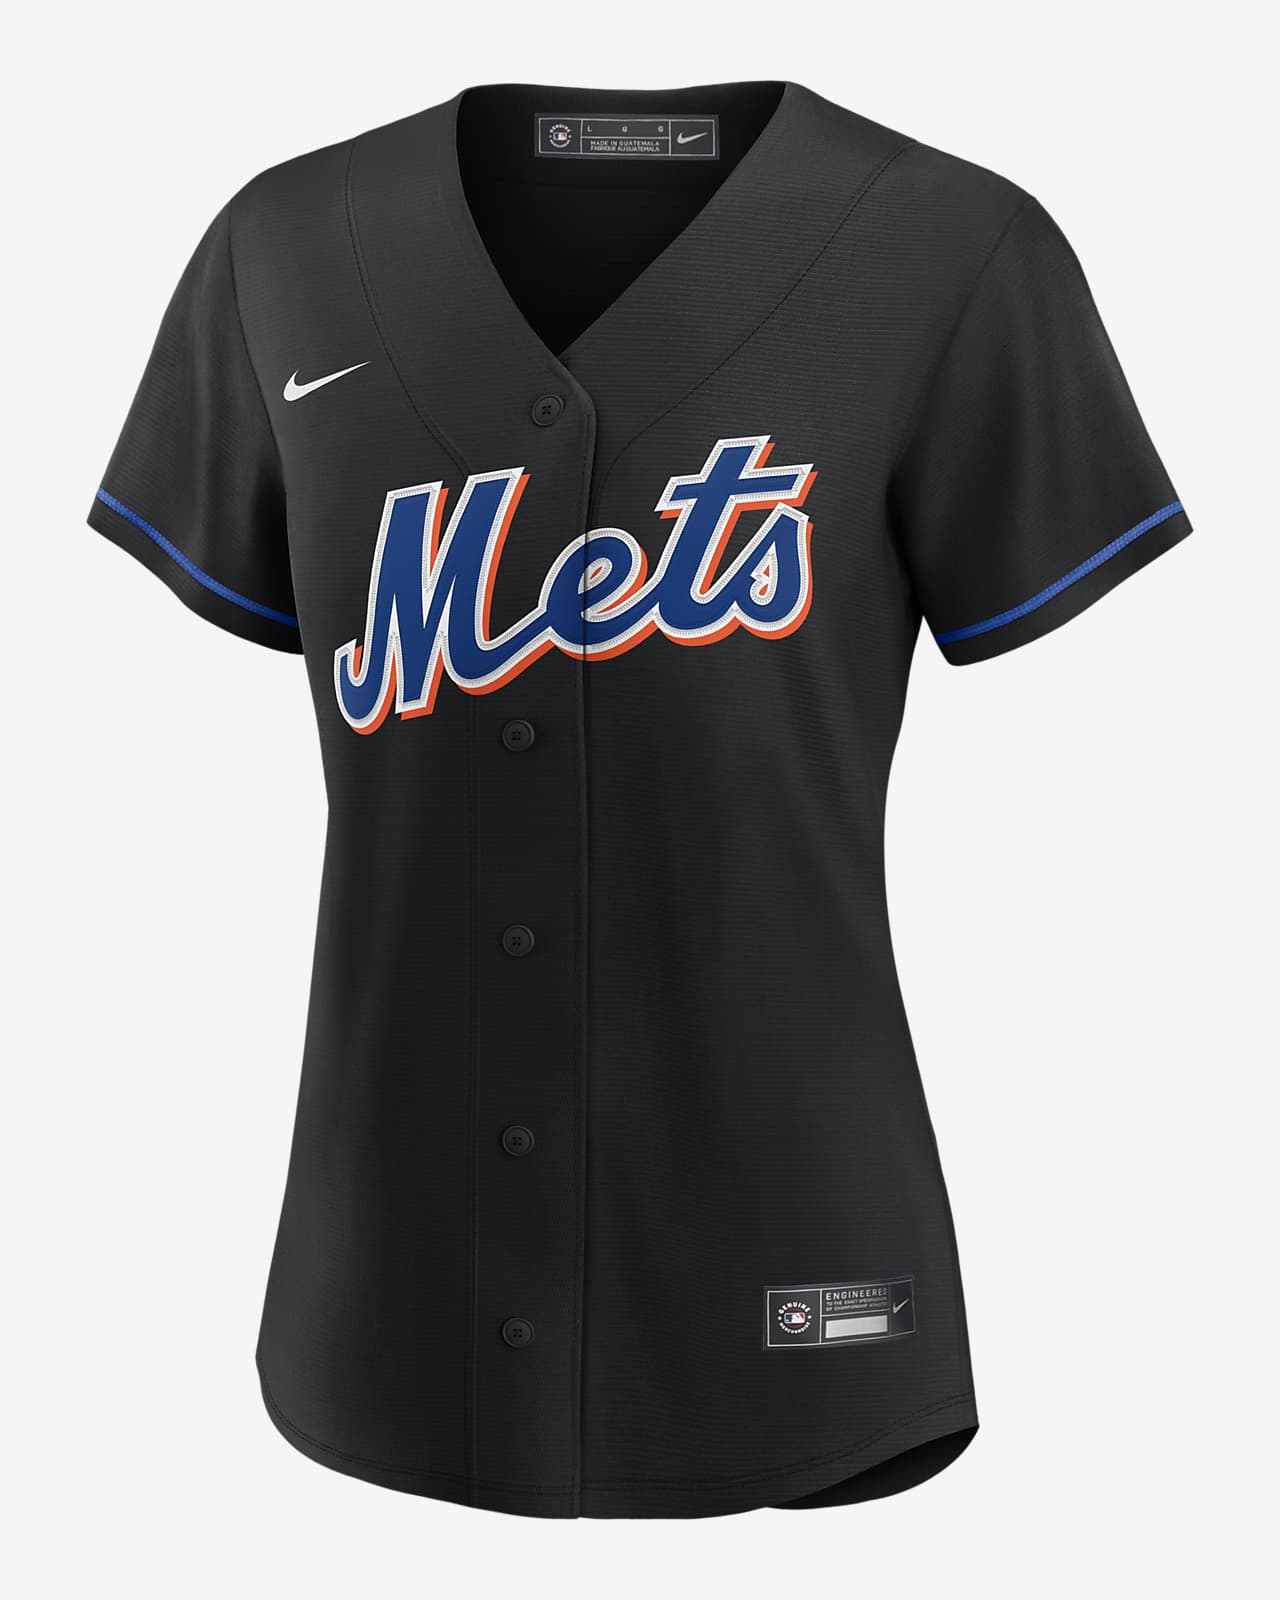 pete alonso mets youth jersey